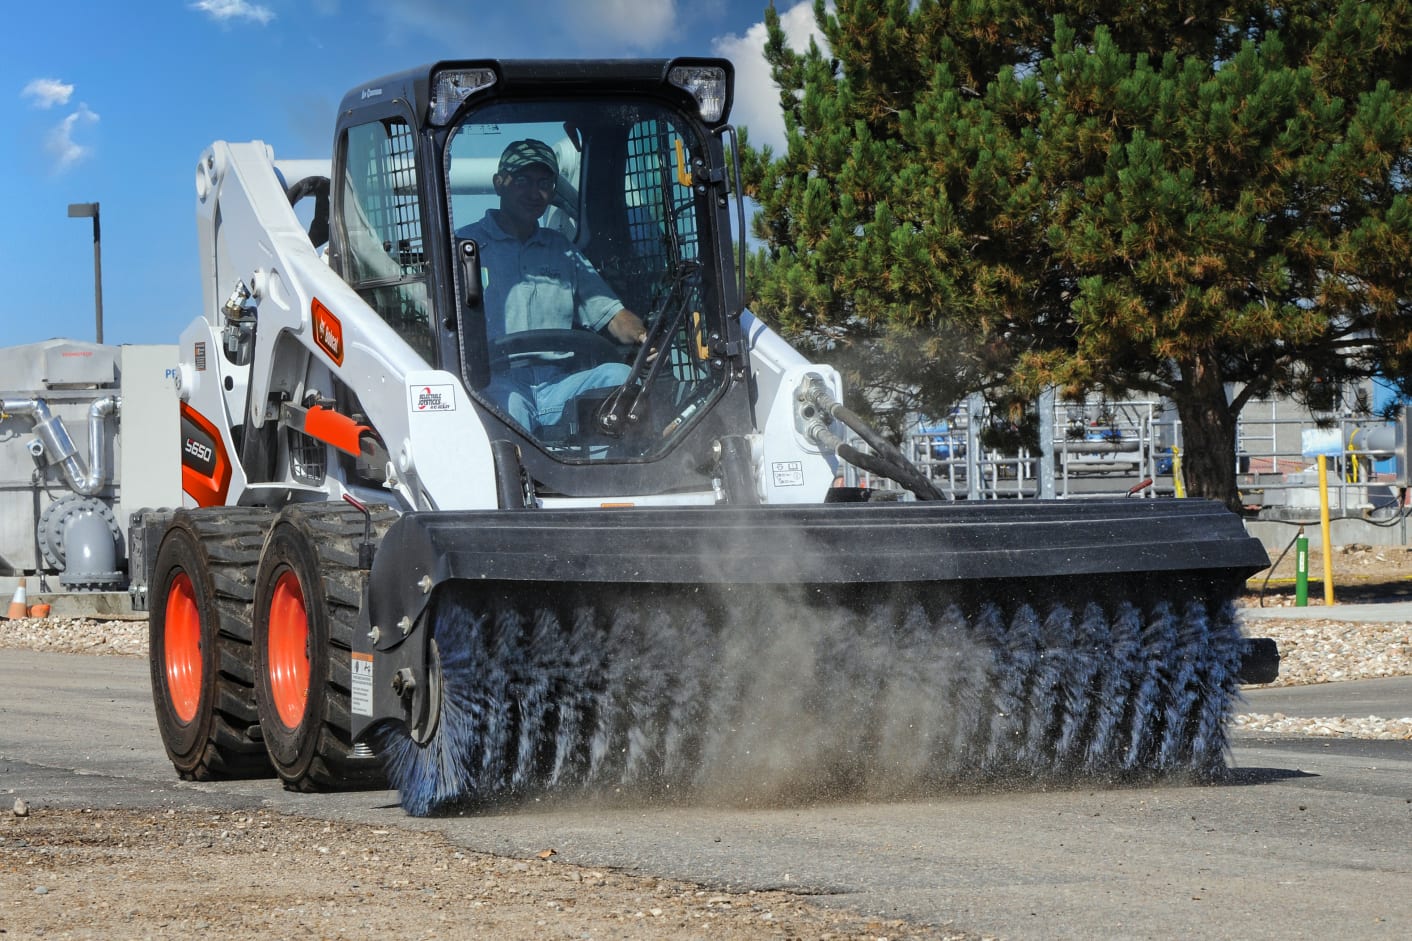 Browse Specs and more for the S650 Skid-Steer Loader - Bobcat of Indy